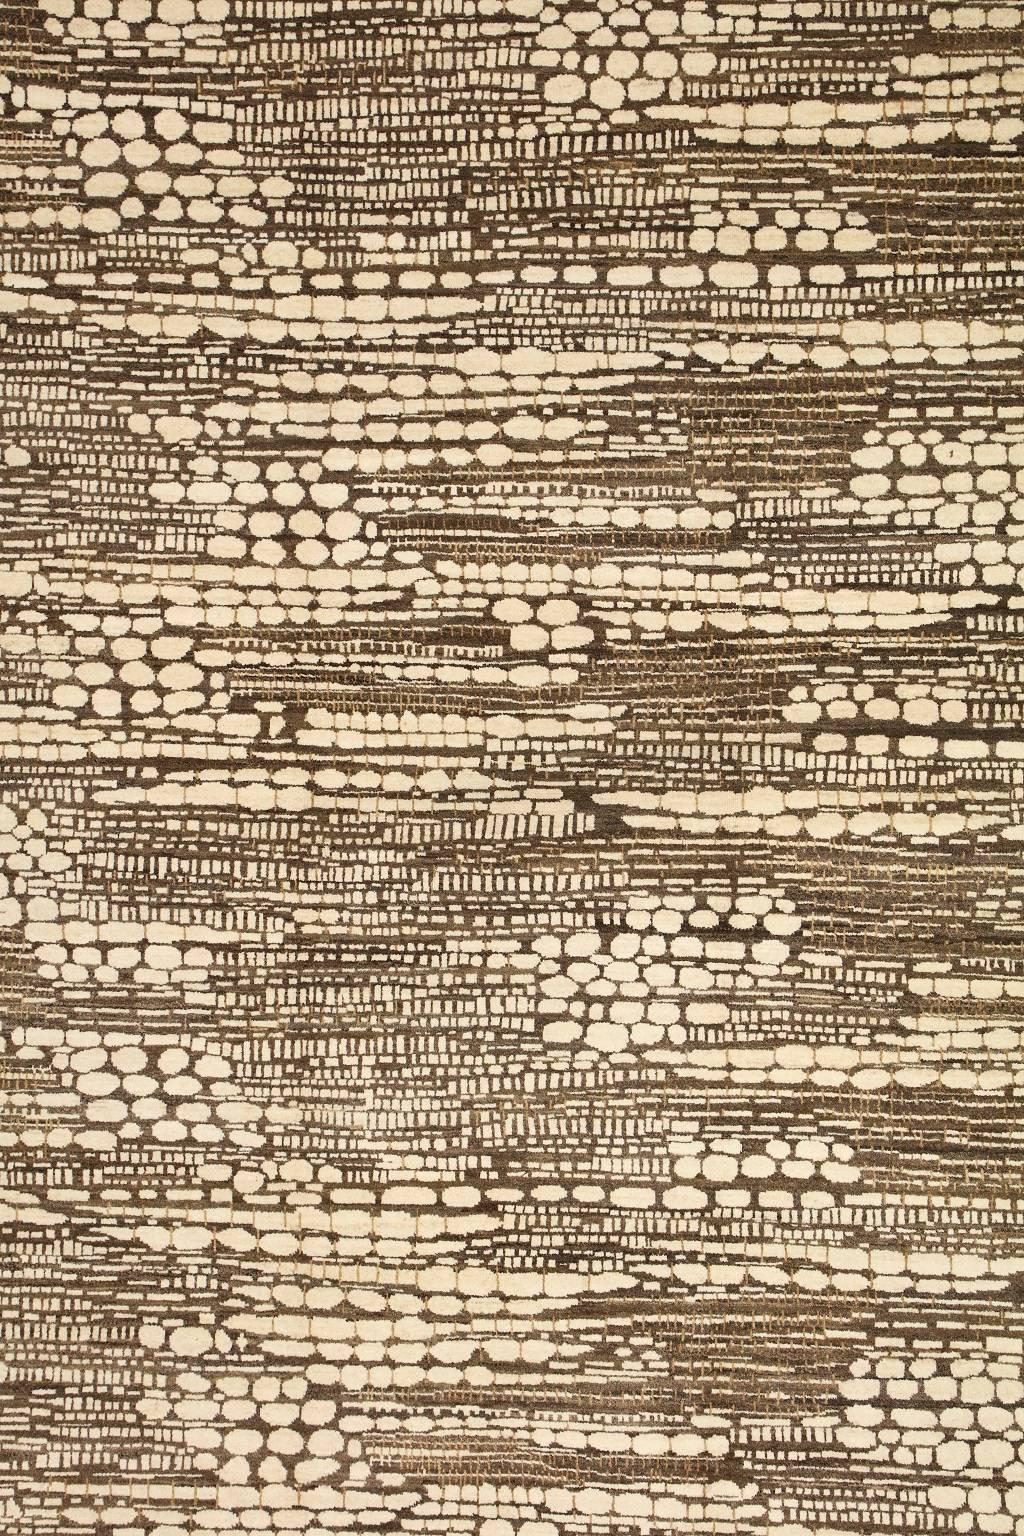 This Orley Shabahang signature carpet in handspun wool and organic vegetable dyes was completed using Orley Shabahang's signature Cheshmeh weaving technique. The wool is also of Orley Shabahang signature, derived from our own heard of Persian